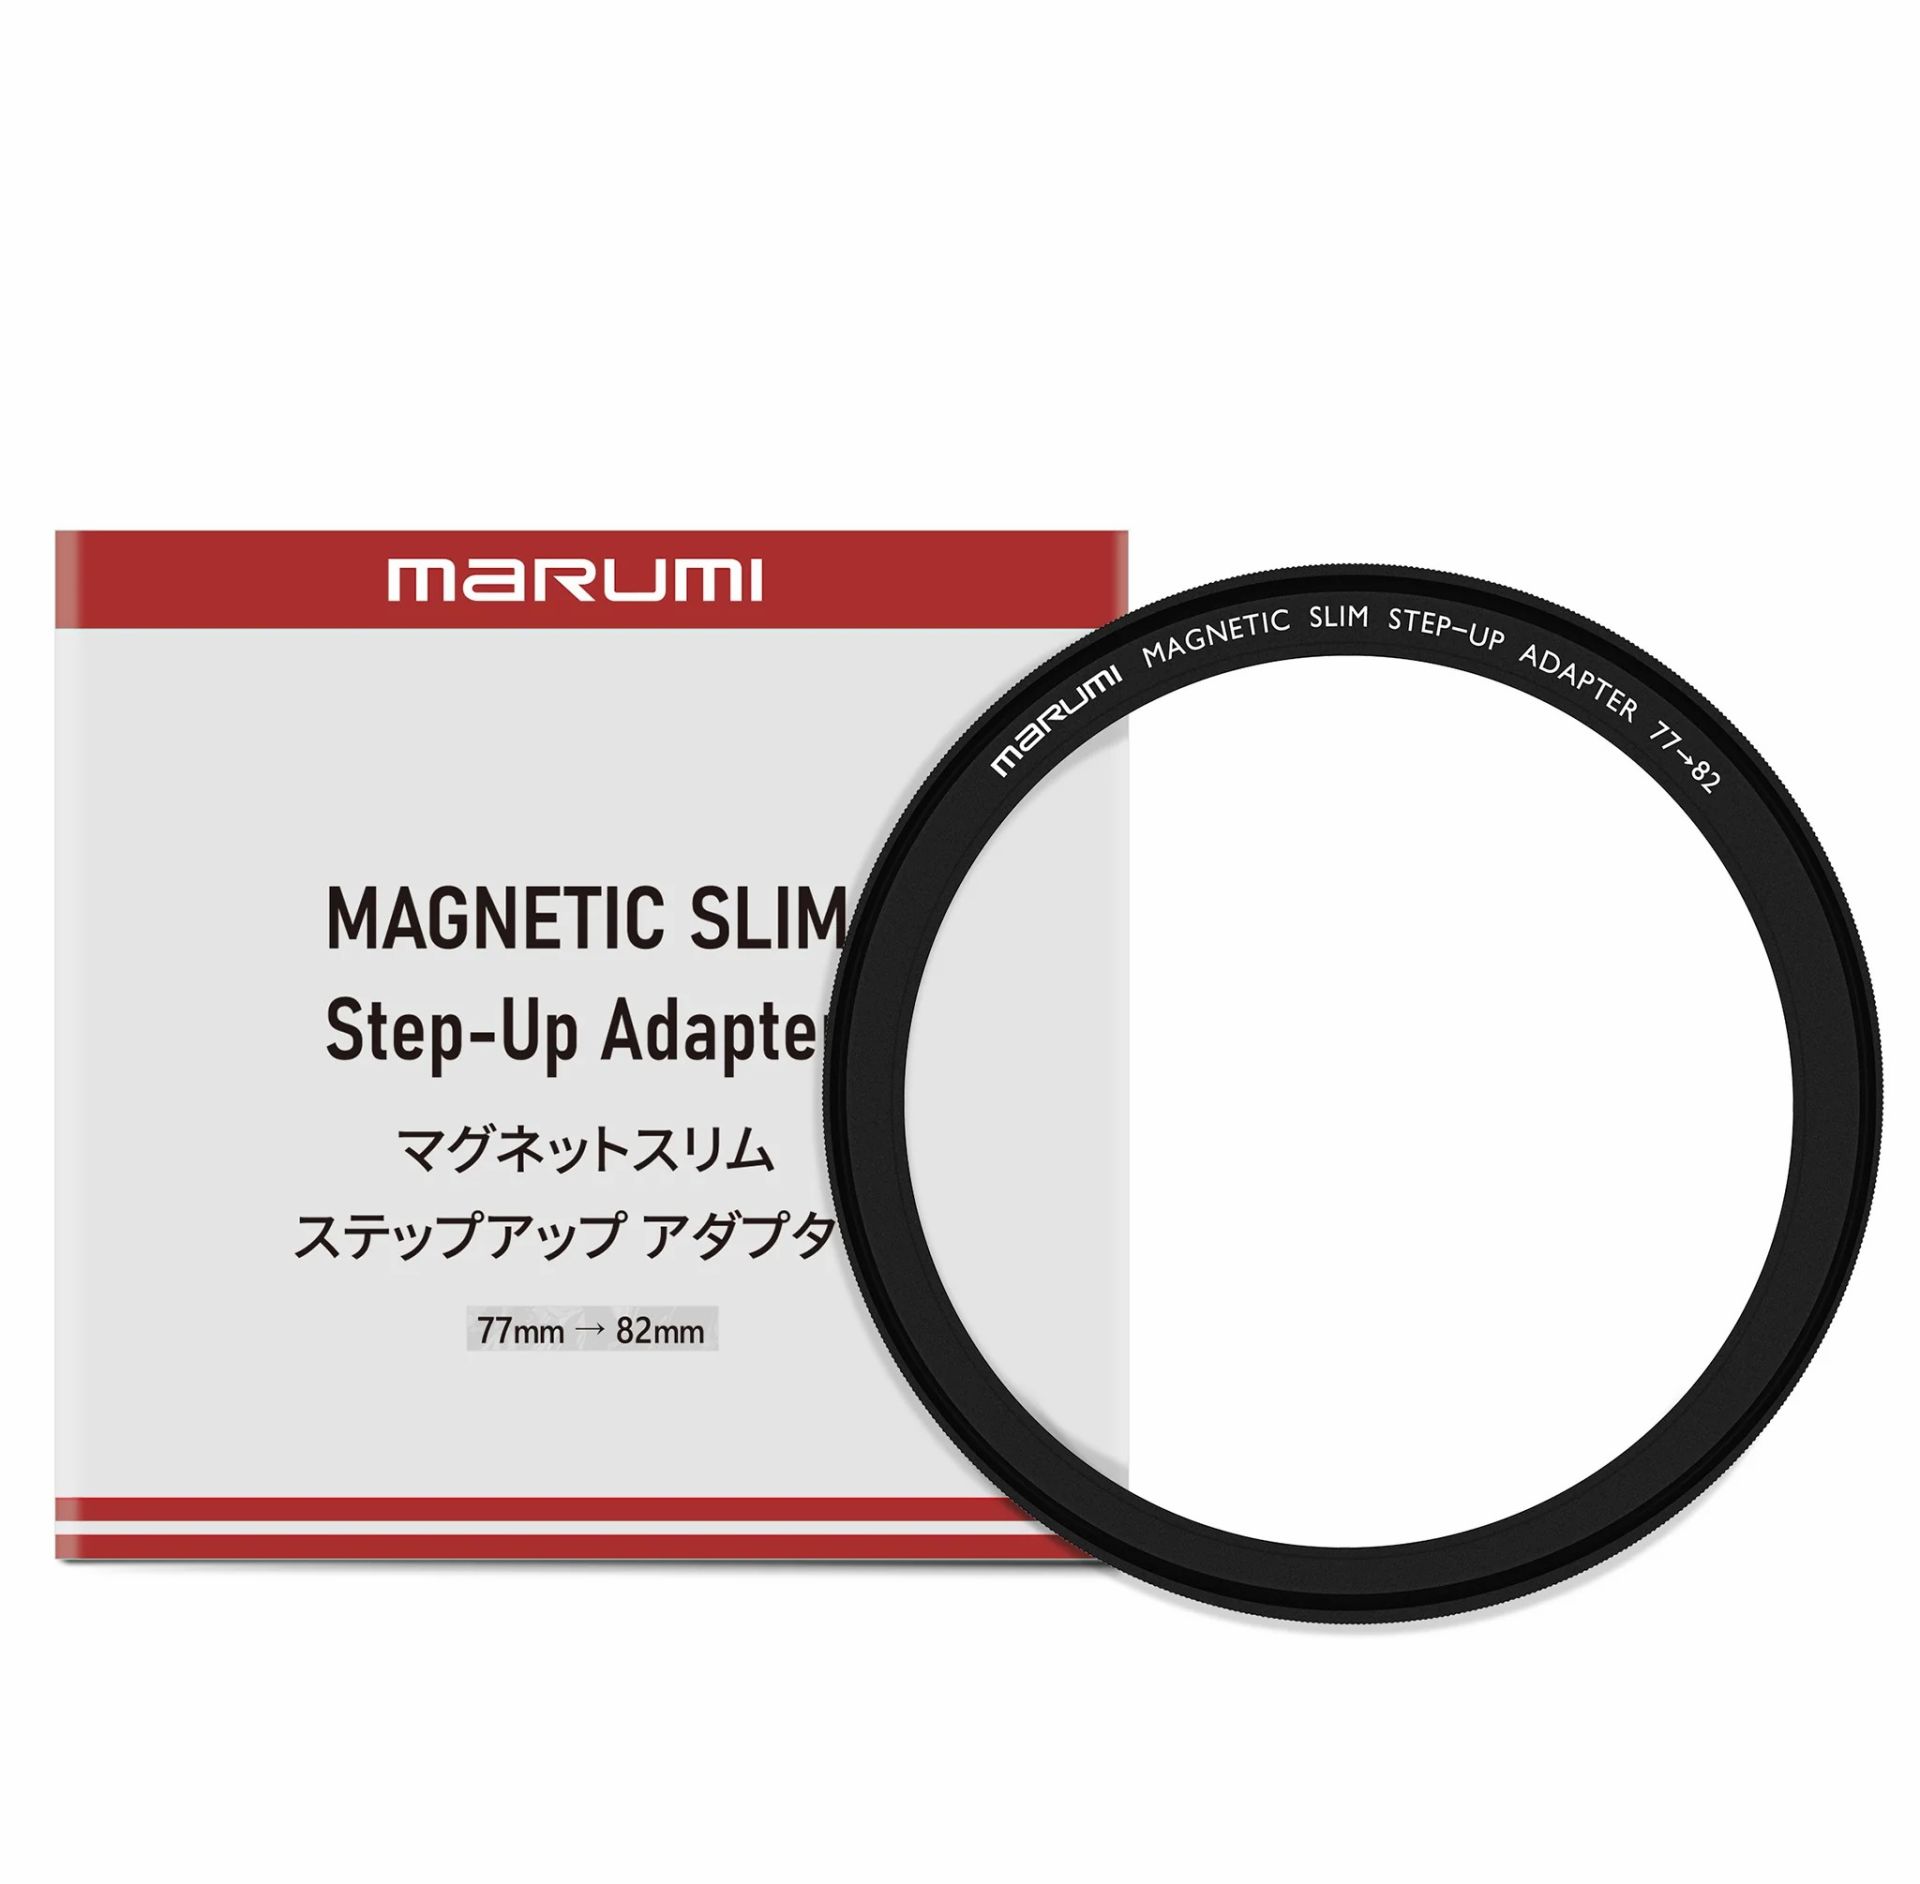 Marumi 77-82mm Magnetic Slim Step-Up Adapter